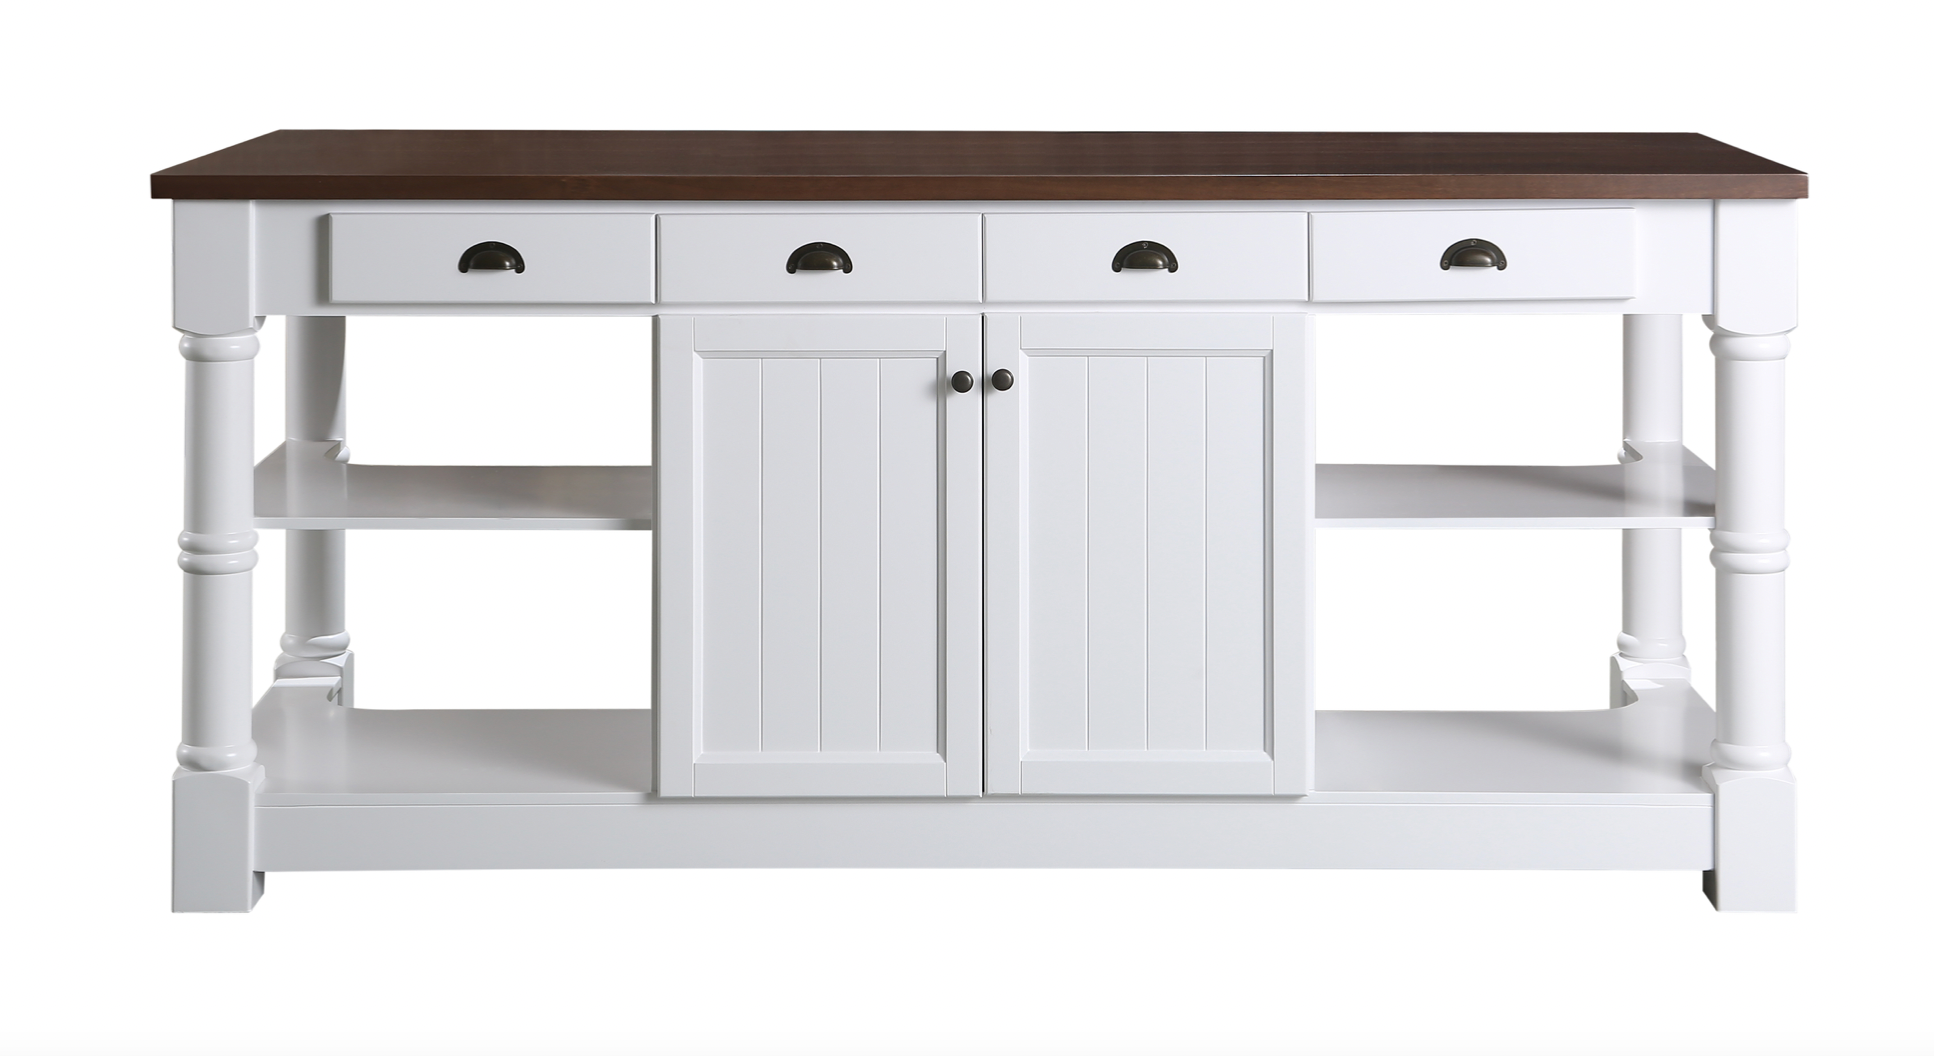 Monterey 80 In. Kitchen Island in White Cabinet Finish and Wood Countertop